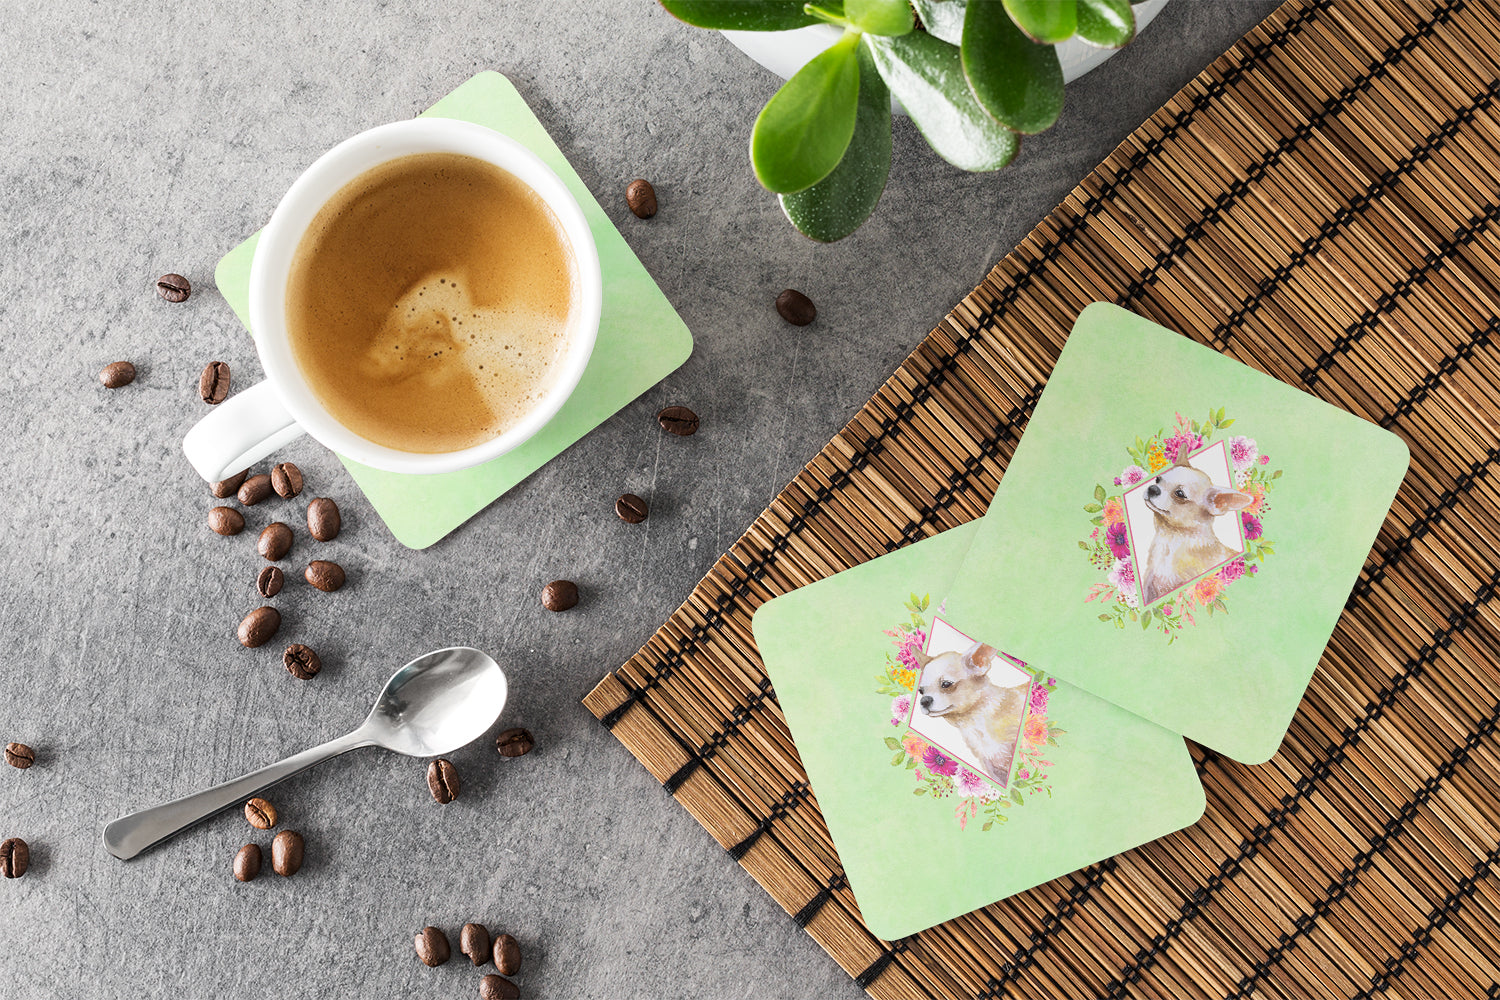 Set of 4 Chihuahua #2 Green Flowers Foam Coasters Set of 4 CK4289FC - the-store.com